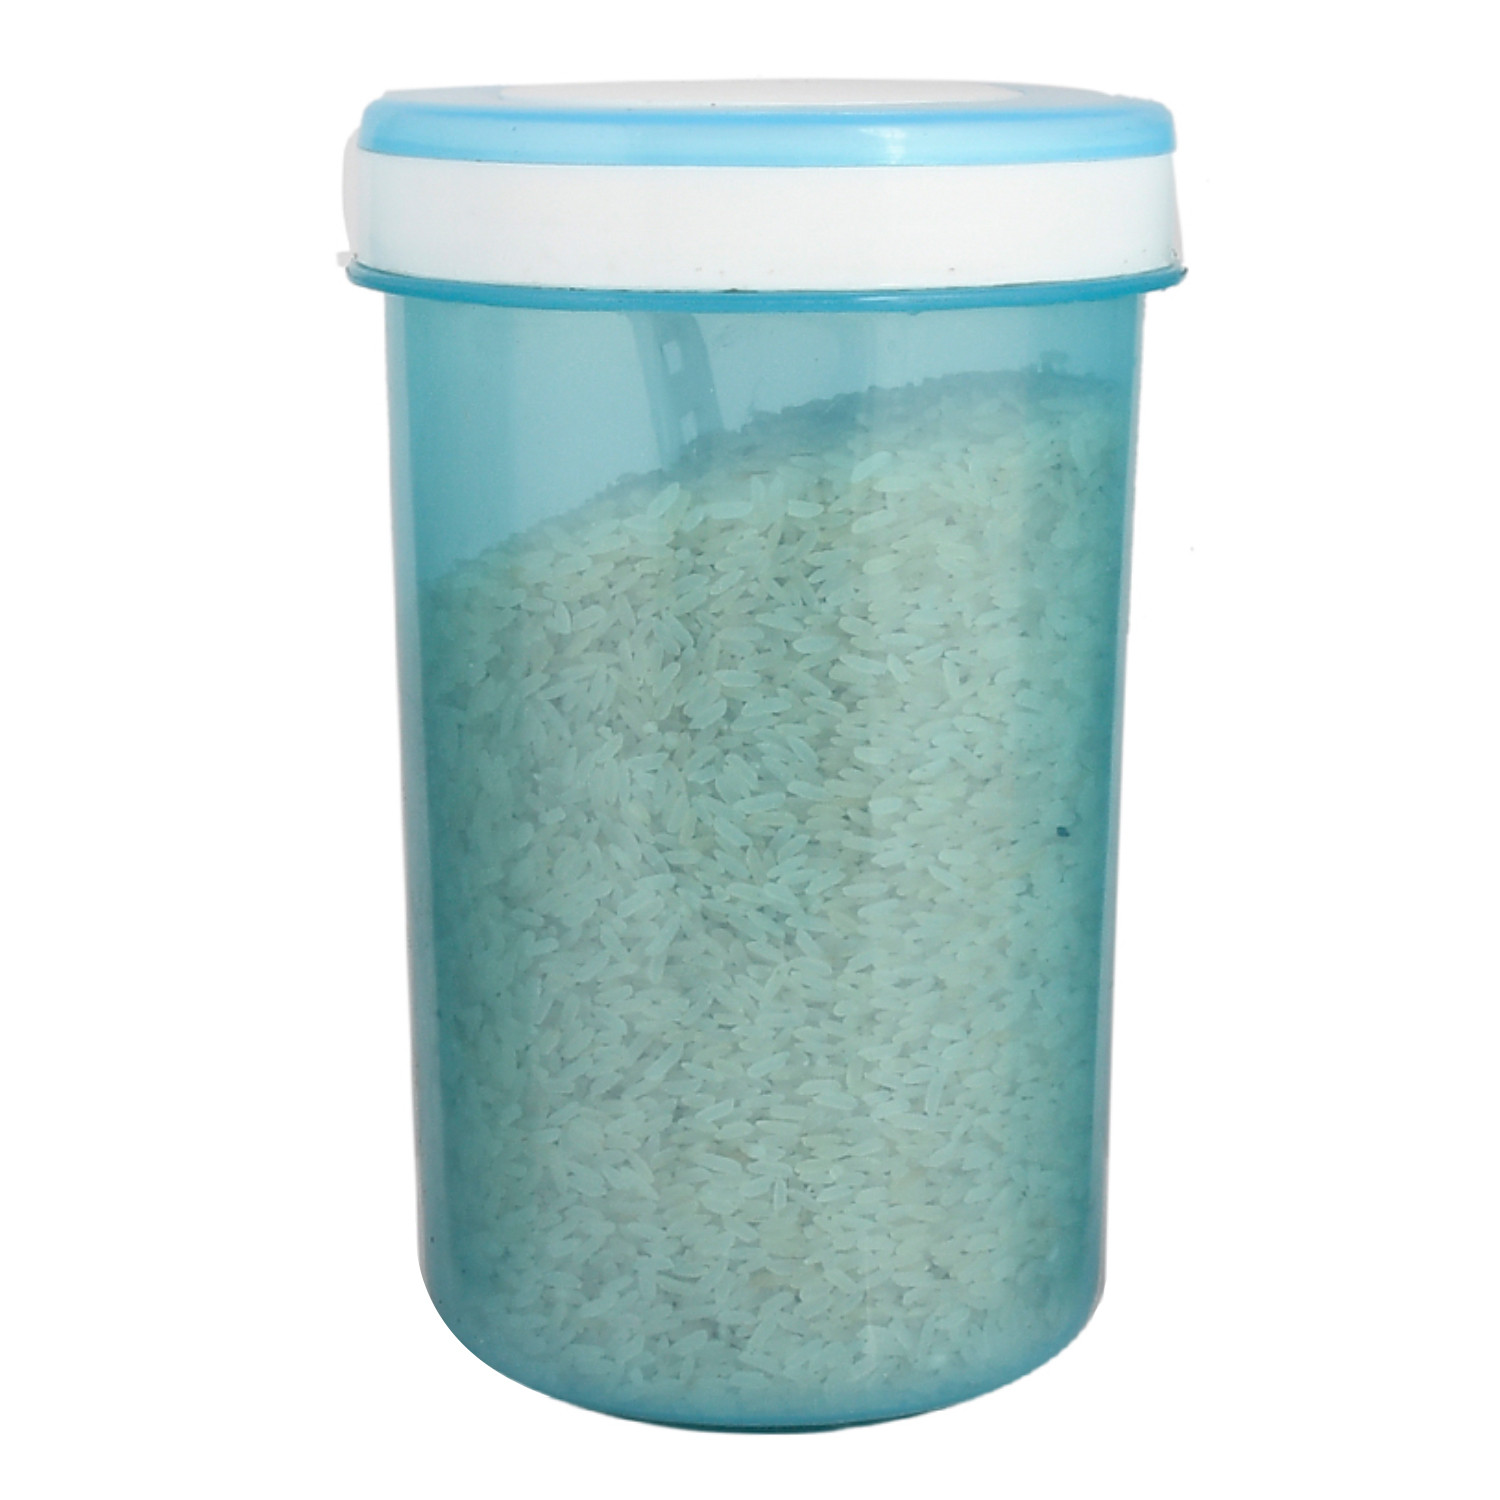 Kuber Industries Containers Set for Kitchen|BPA-Free Plastic Storage Containers Set|Kitchen Storage Containers|Grocery Containers with Spoon|SPICY 2200 ML|(Sky Blue)